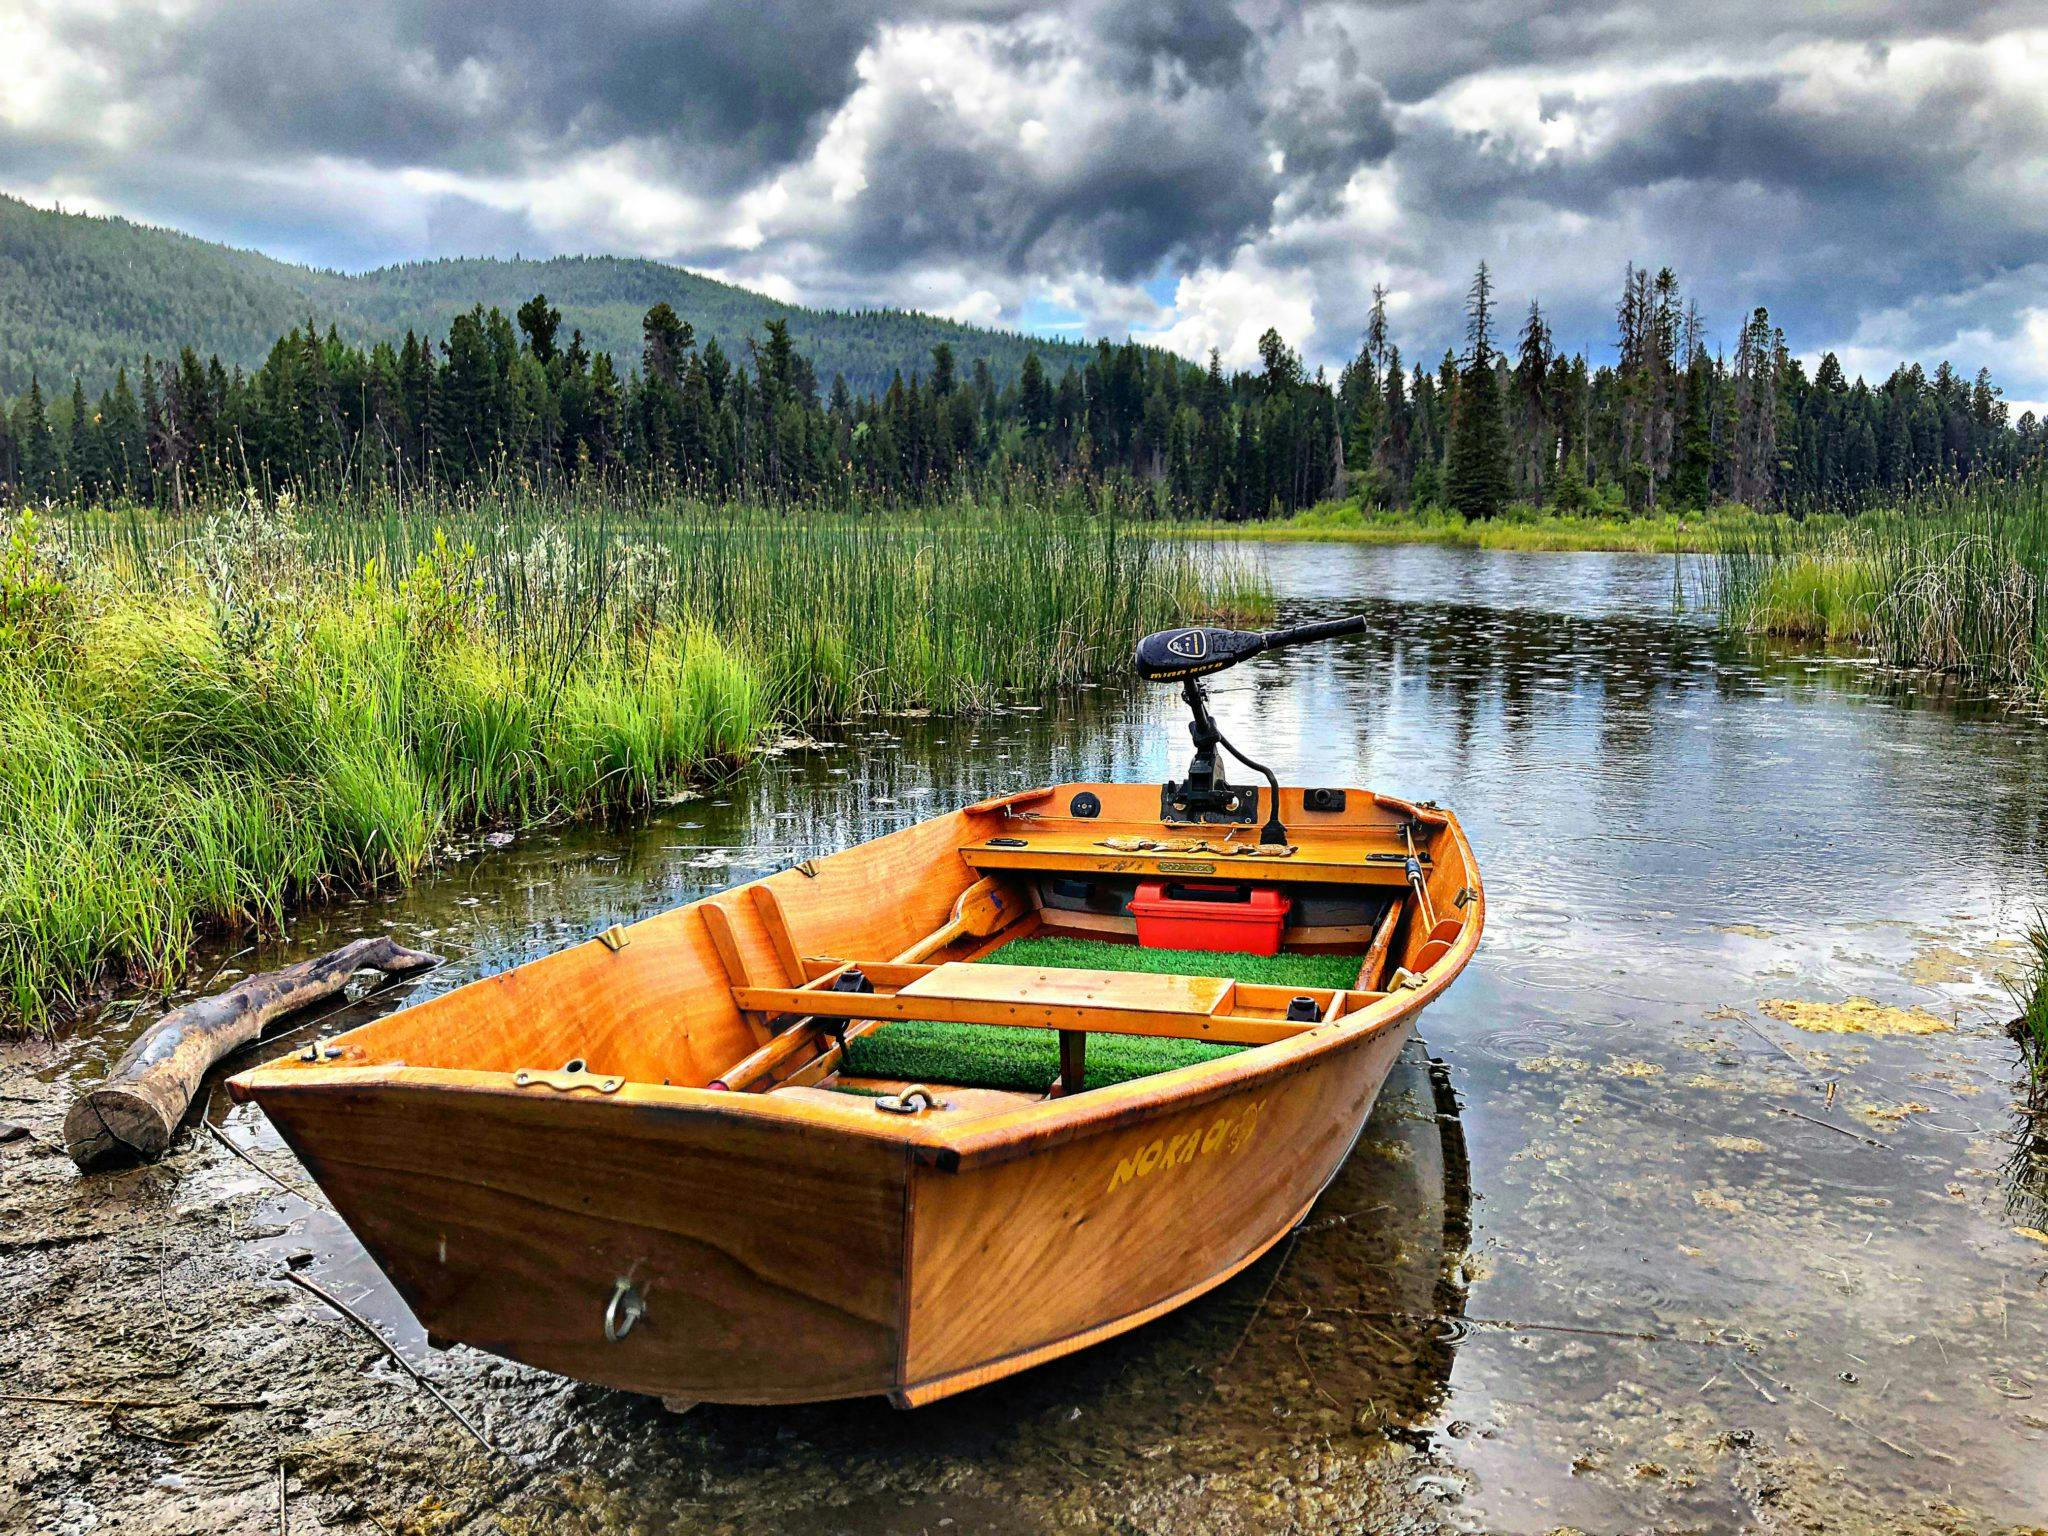 A wooden boat on the side of a lake